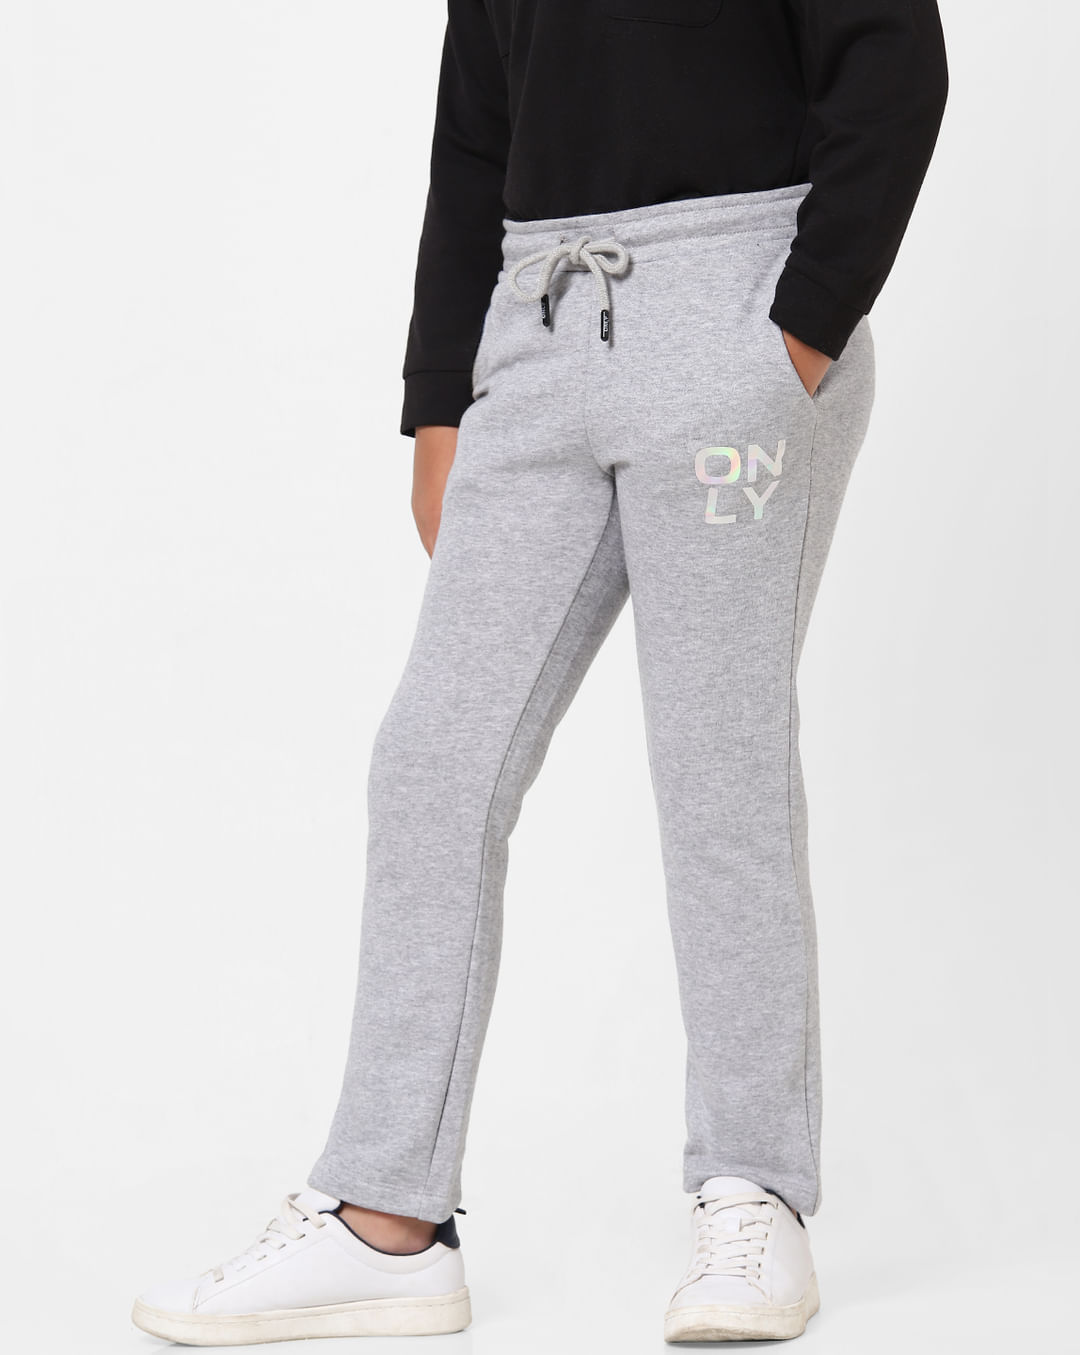 Buy Grey Mid Rise Pants for Girls Online at KidsOnly